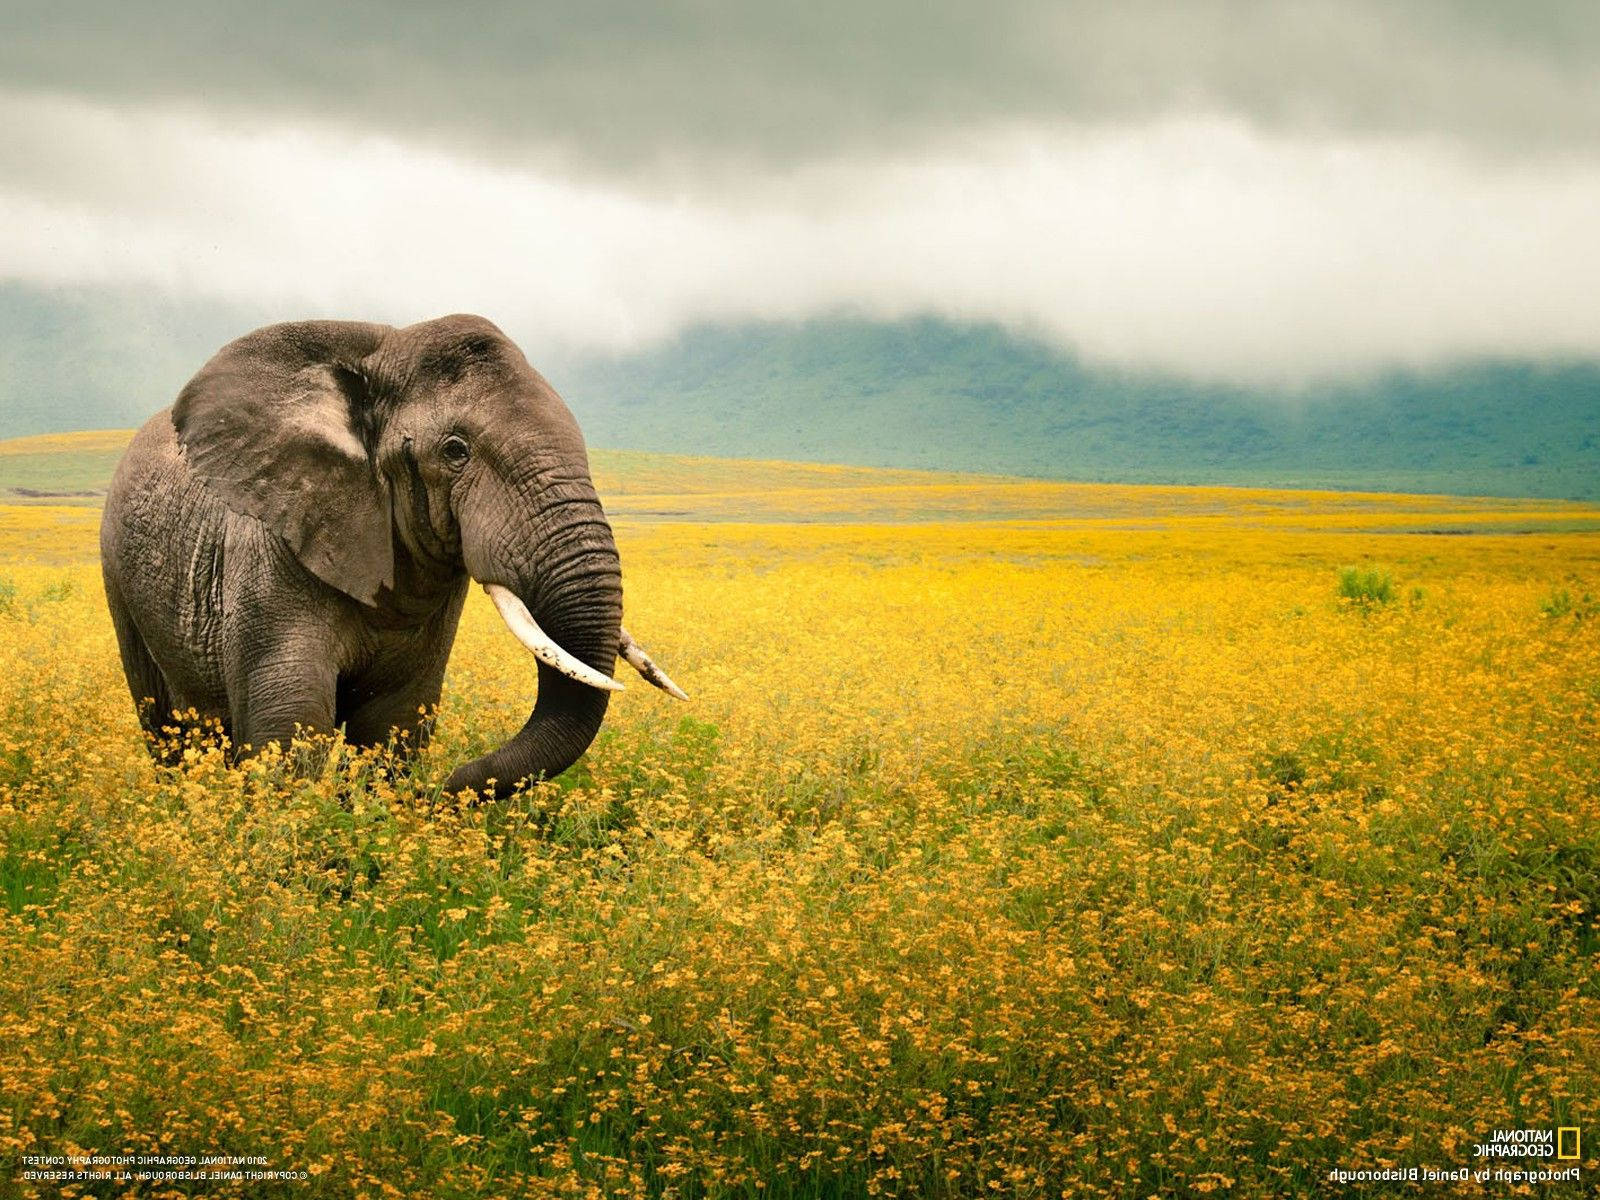 Download National Geographic Elephants Flower Field Wallpaper | Wallpapers .com